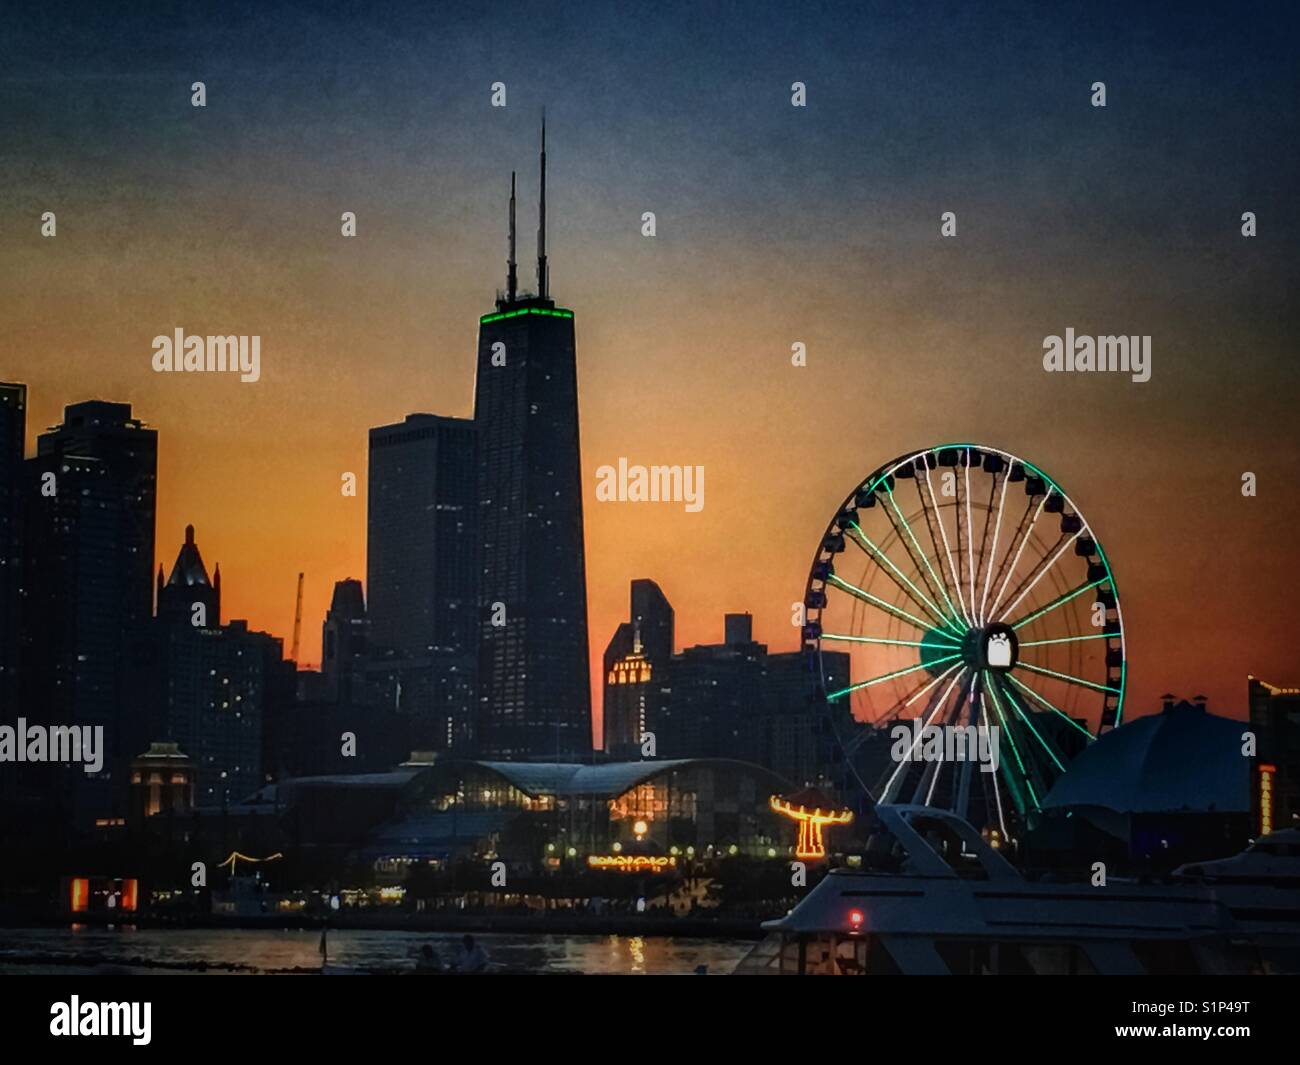 Night lights at Navy Pier, Chicago during sunset Stock Photo